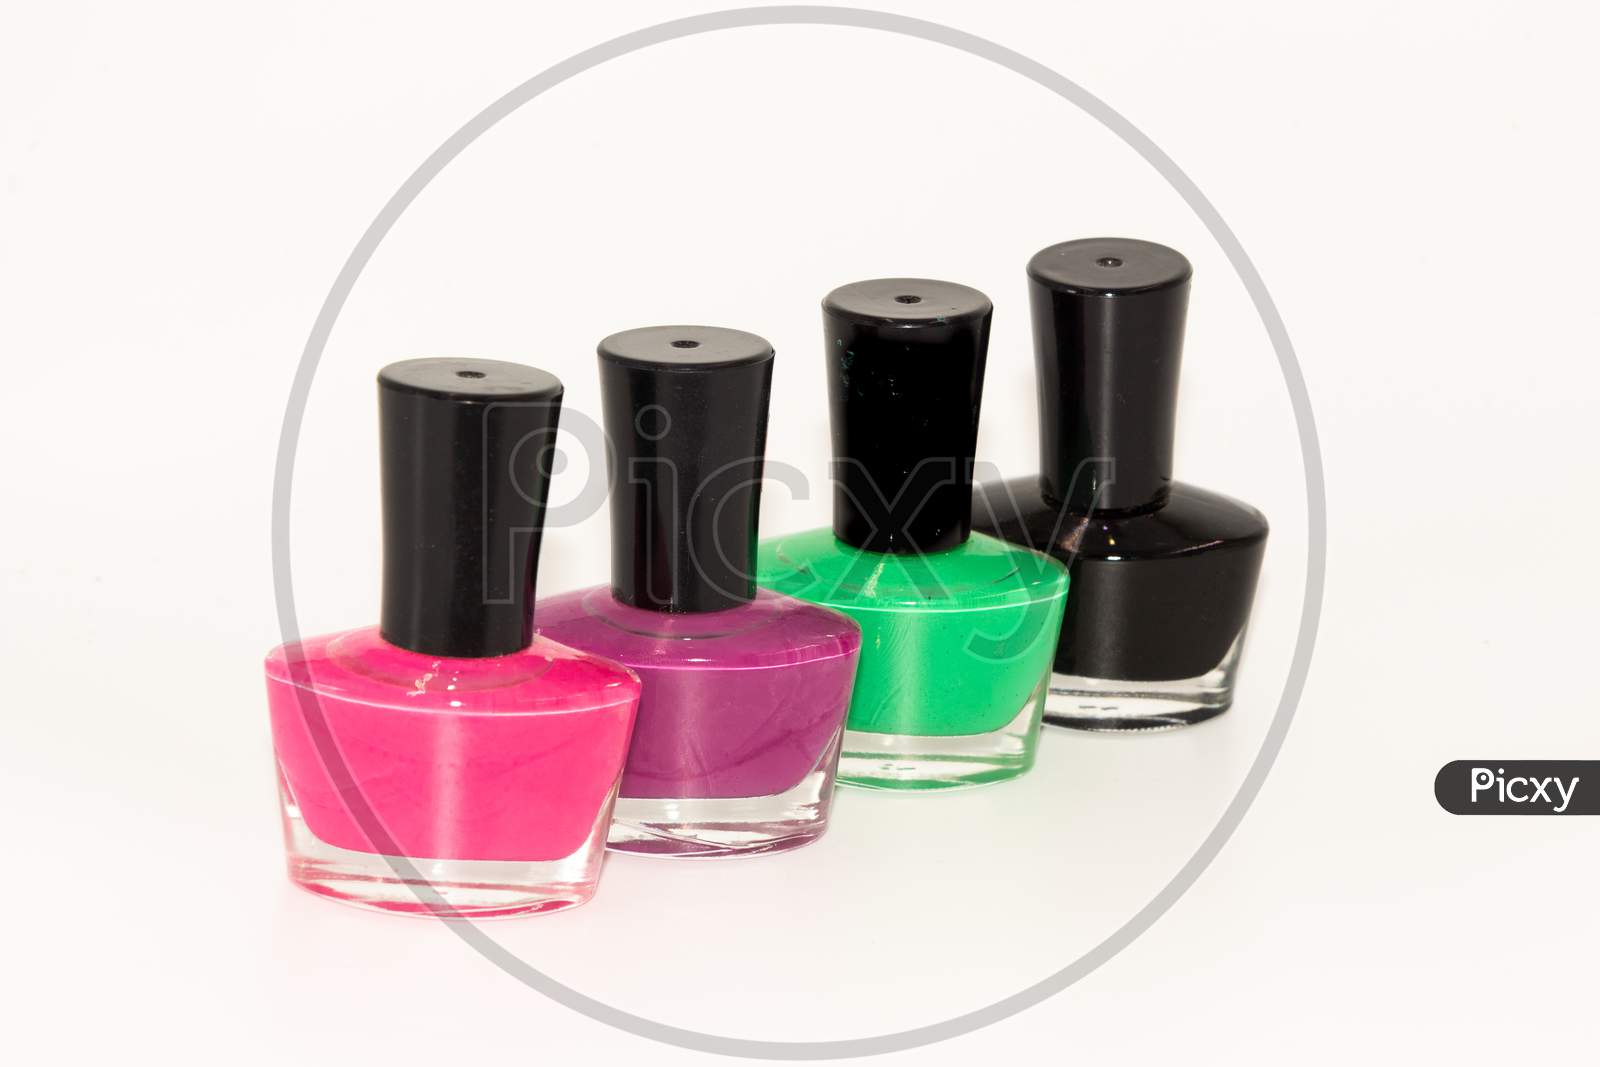 Colored nail polish kept on display with white background